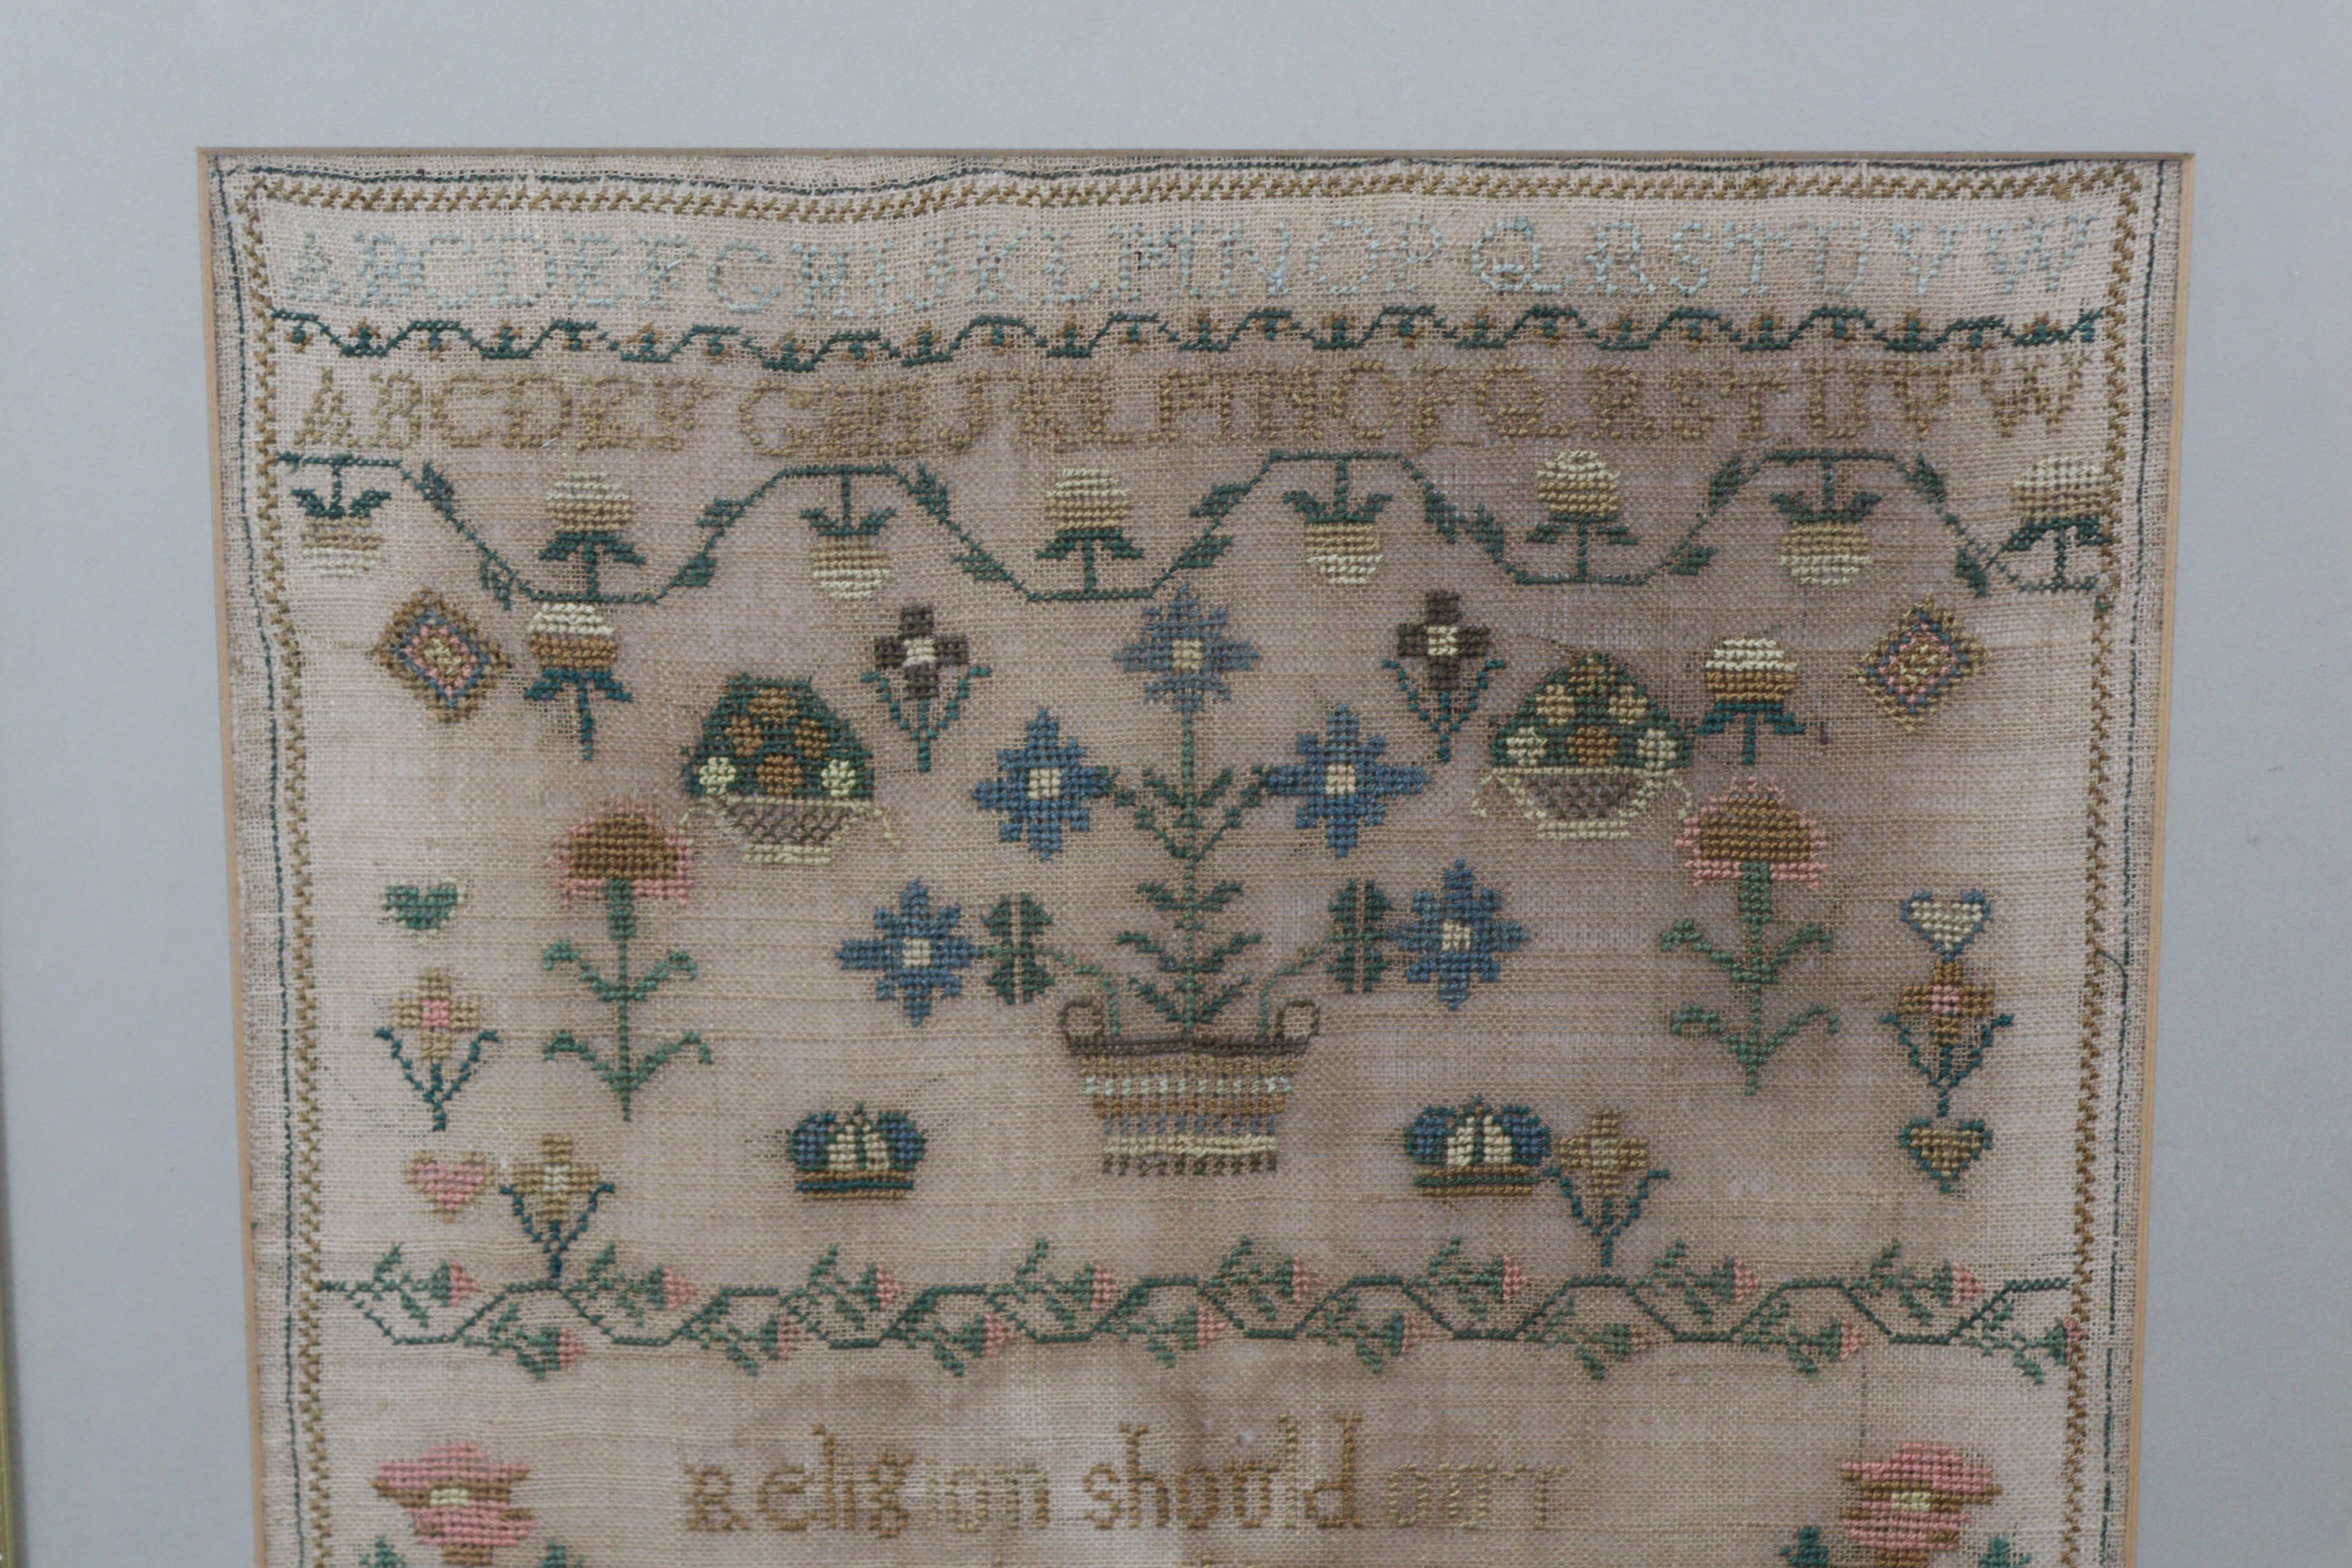 A George III silk needlework sampler inscribed “Mary Ann Williams, Her Work, 1815”, with alphabet, - Image 2 of 3